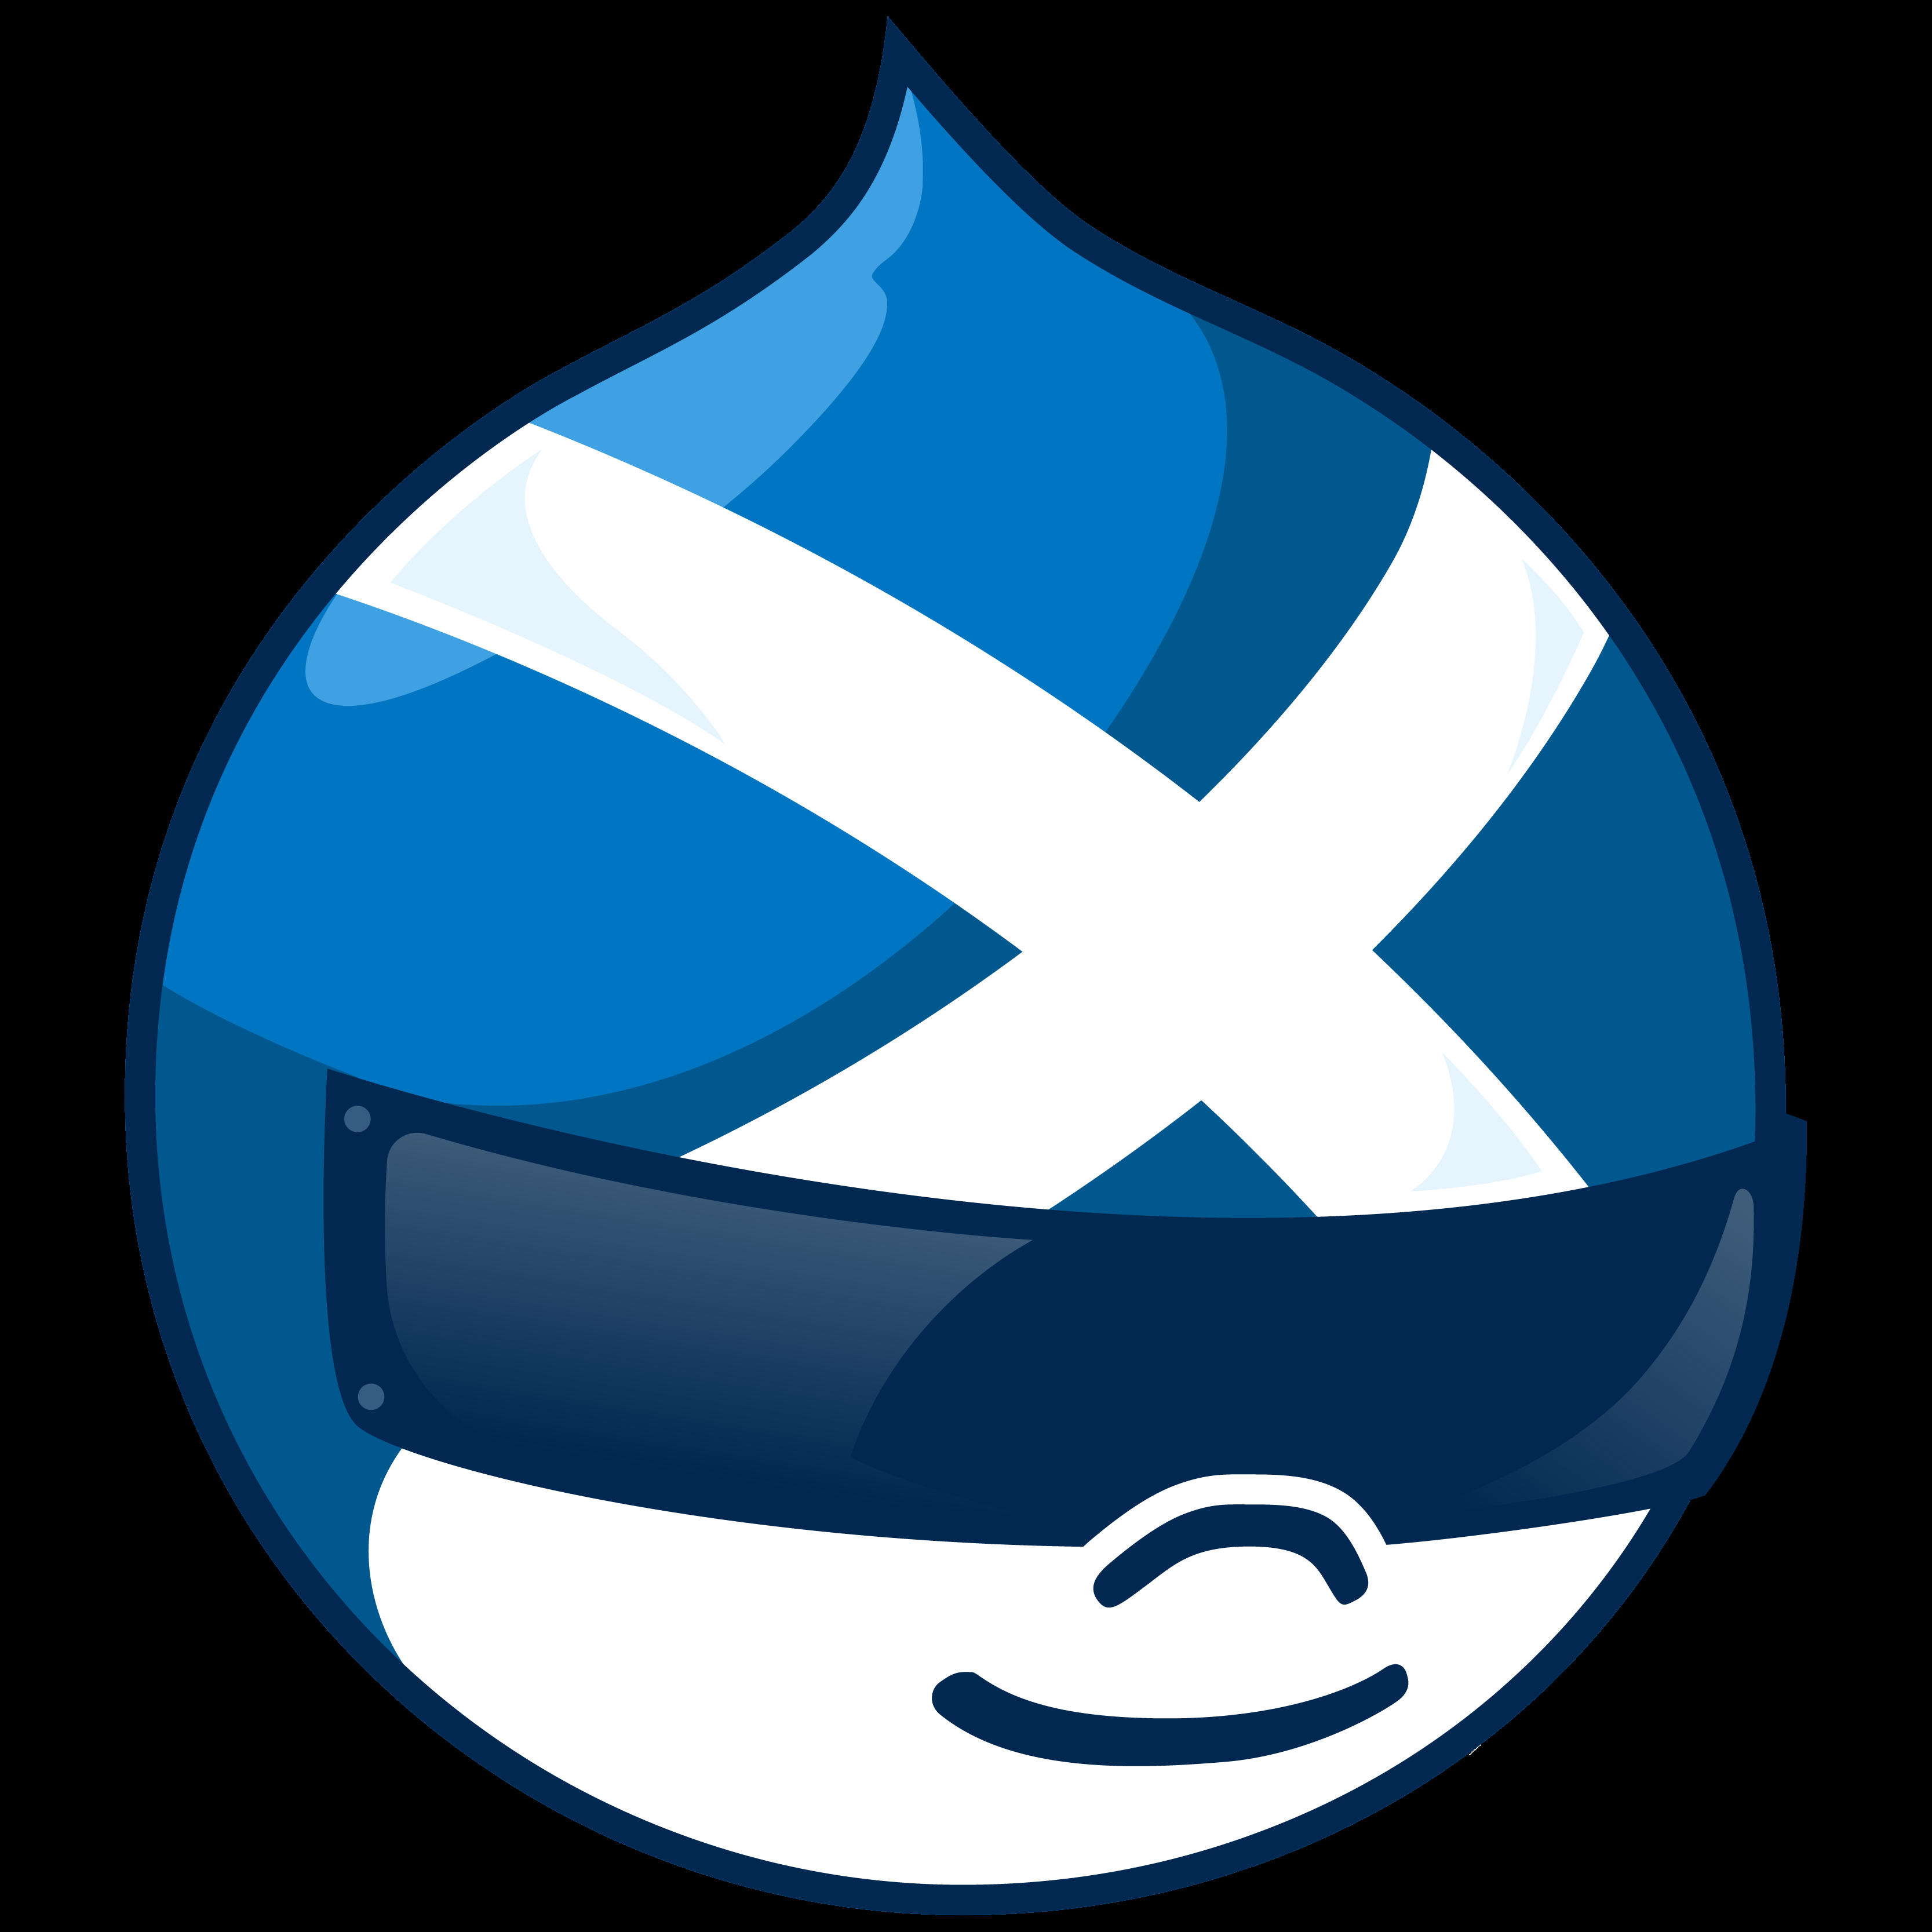 Drupalicon with an "X" on forehead